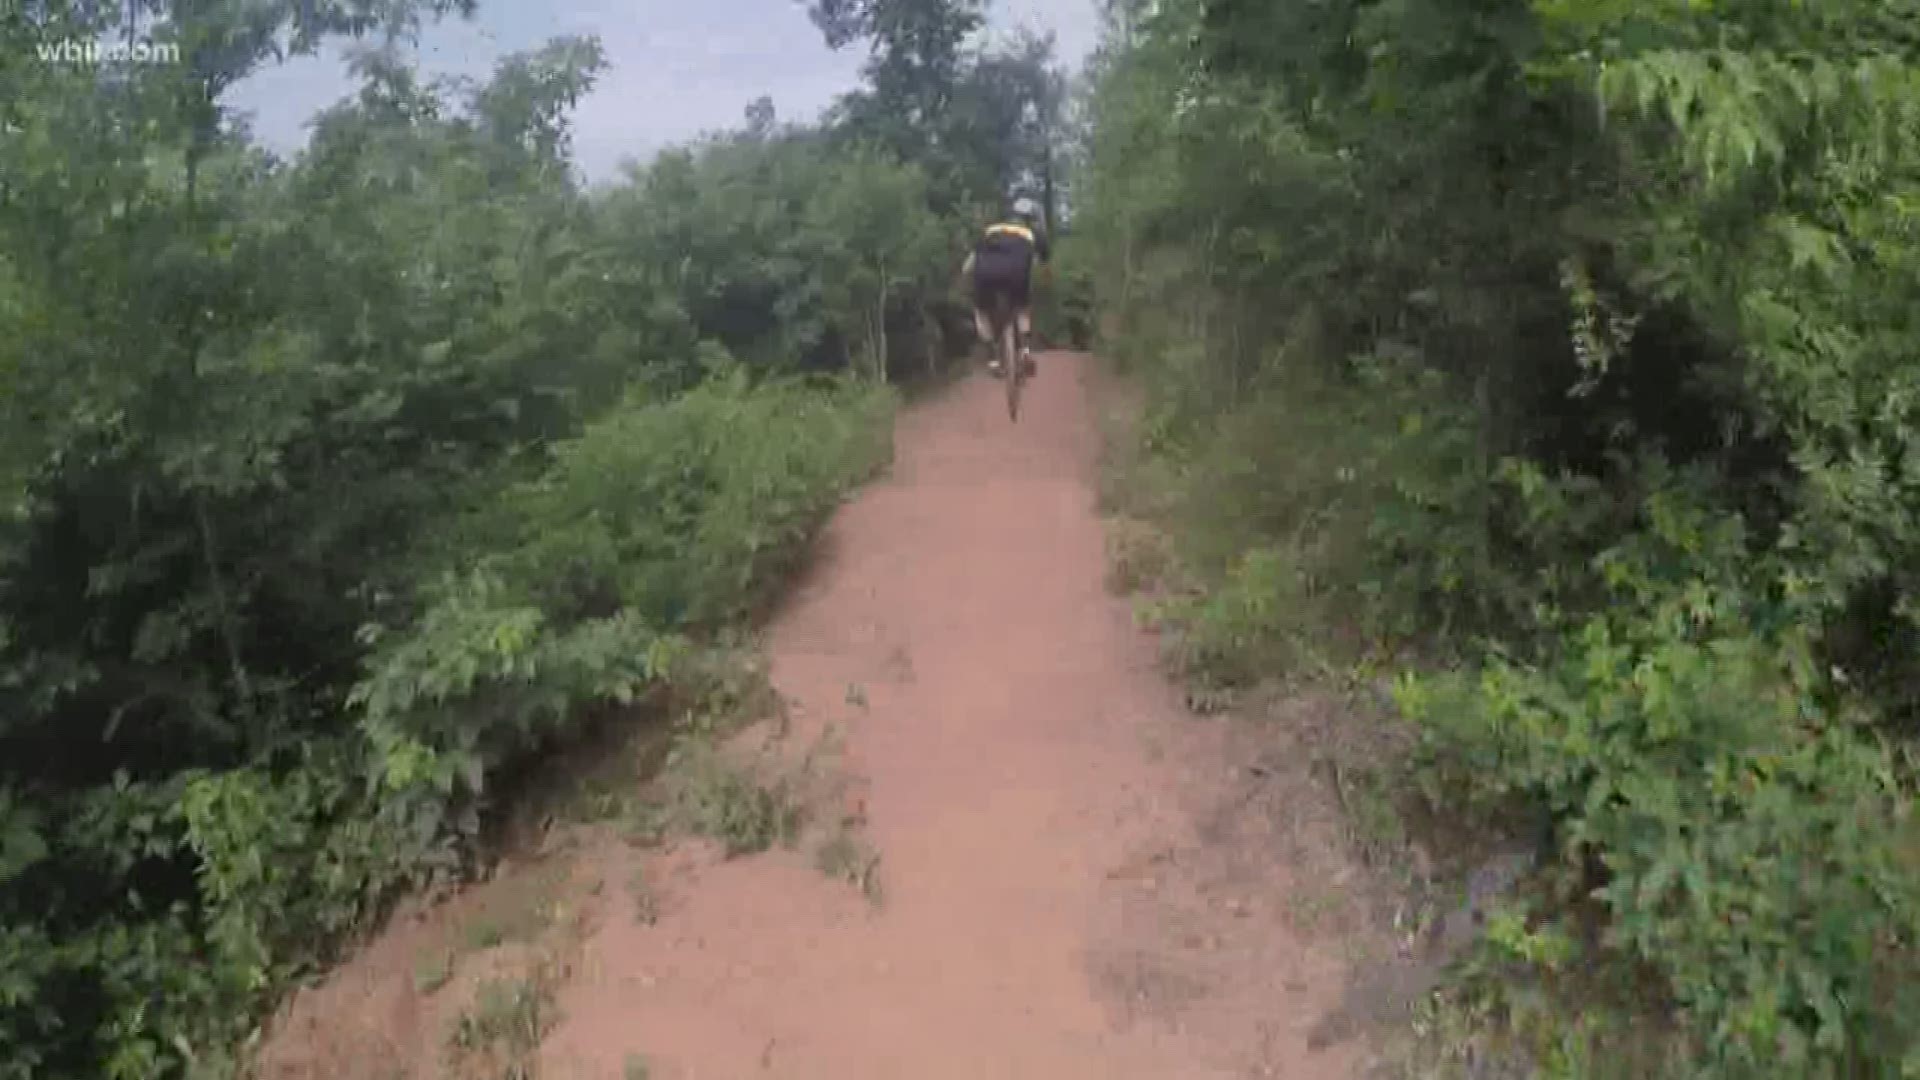 South Knoxville's success in creating an abundance of new bike trails is inspiring a local non profit to try something similar in Oak Ridge. The Clinch Valley Trail Alliance is hoping to convert an unused piece of land in Oak Ridge into a multi skill level mountain biking and hiking Mecca.